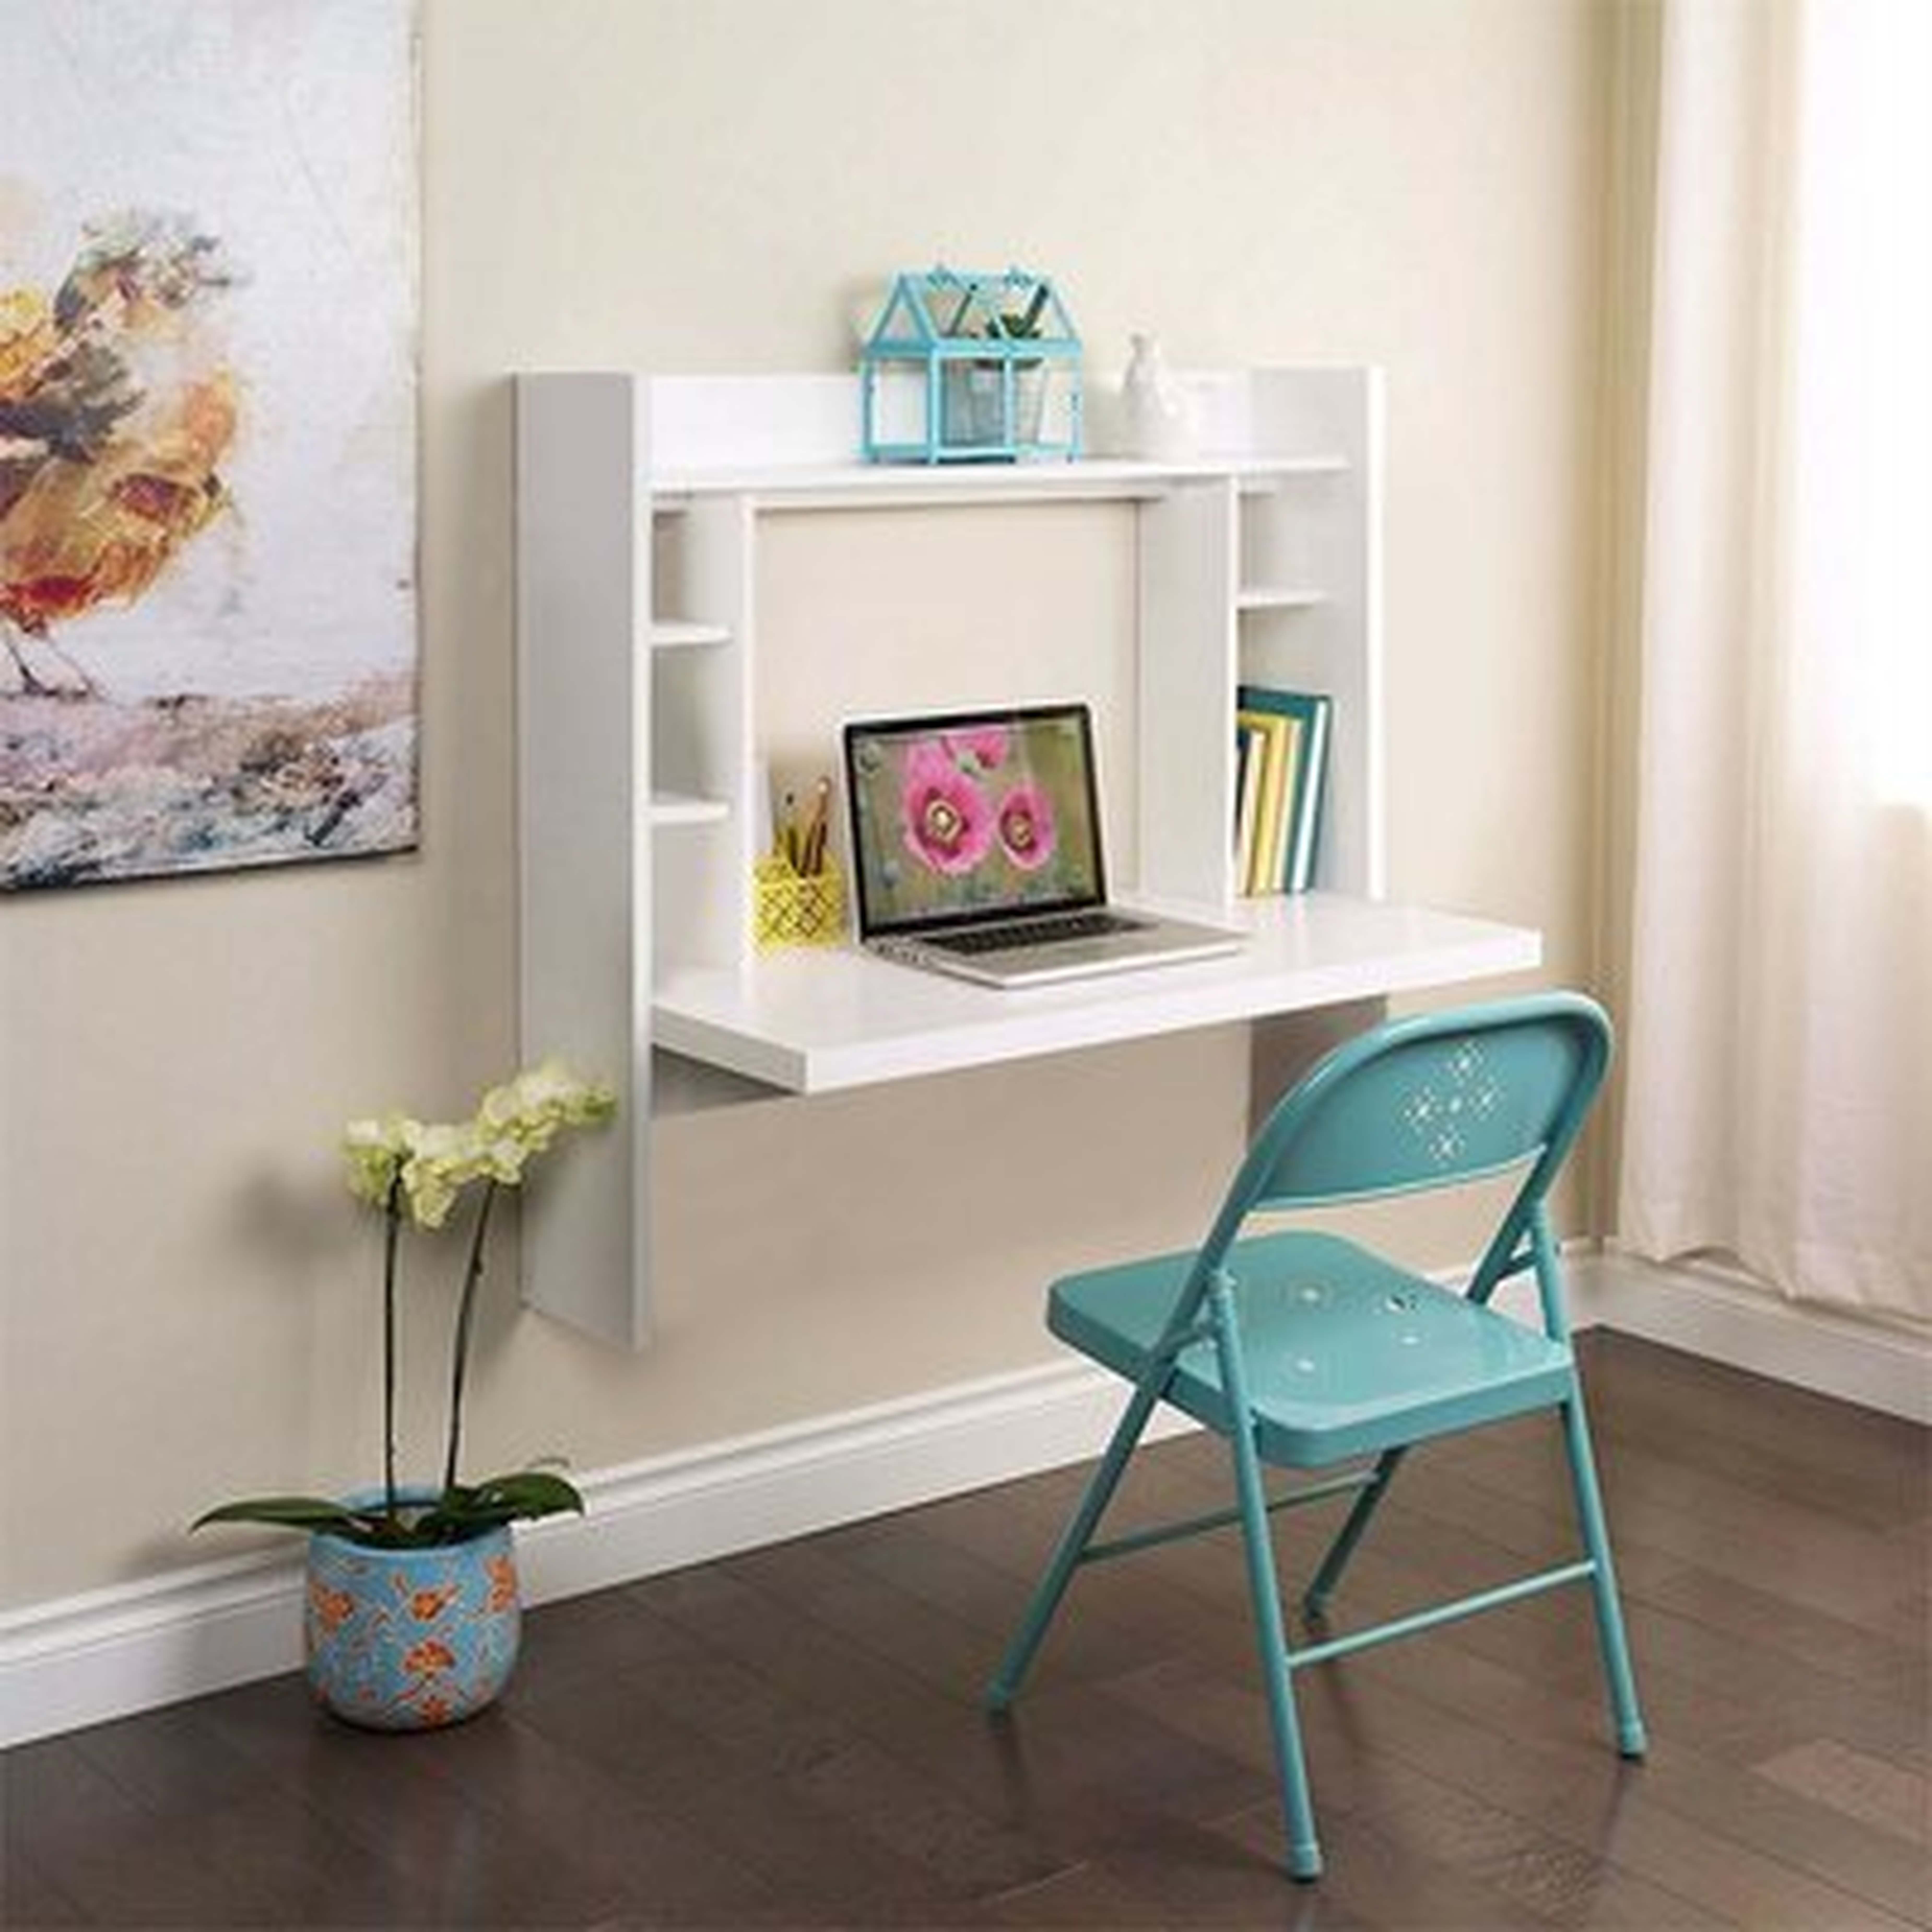 Wall Mounted Desk With Storage Shelves Home Computer Table Floating Dining Desk - Wayfair